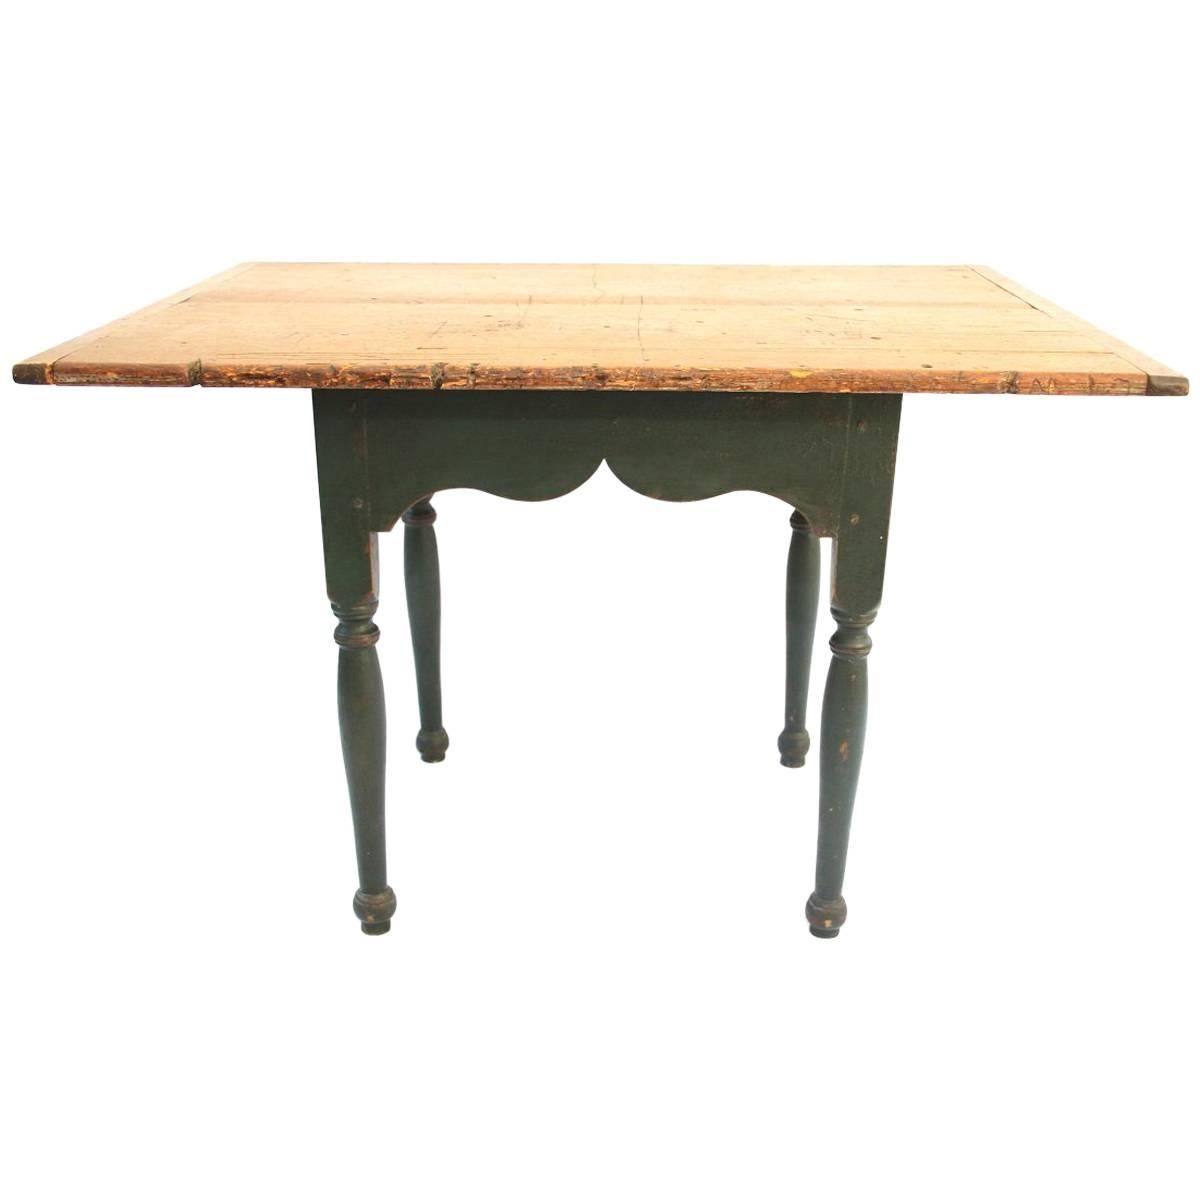 Late 18th-Early 19th Century New England Painted Tavern Table For Sale